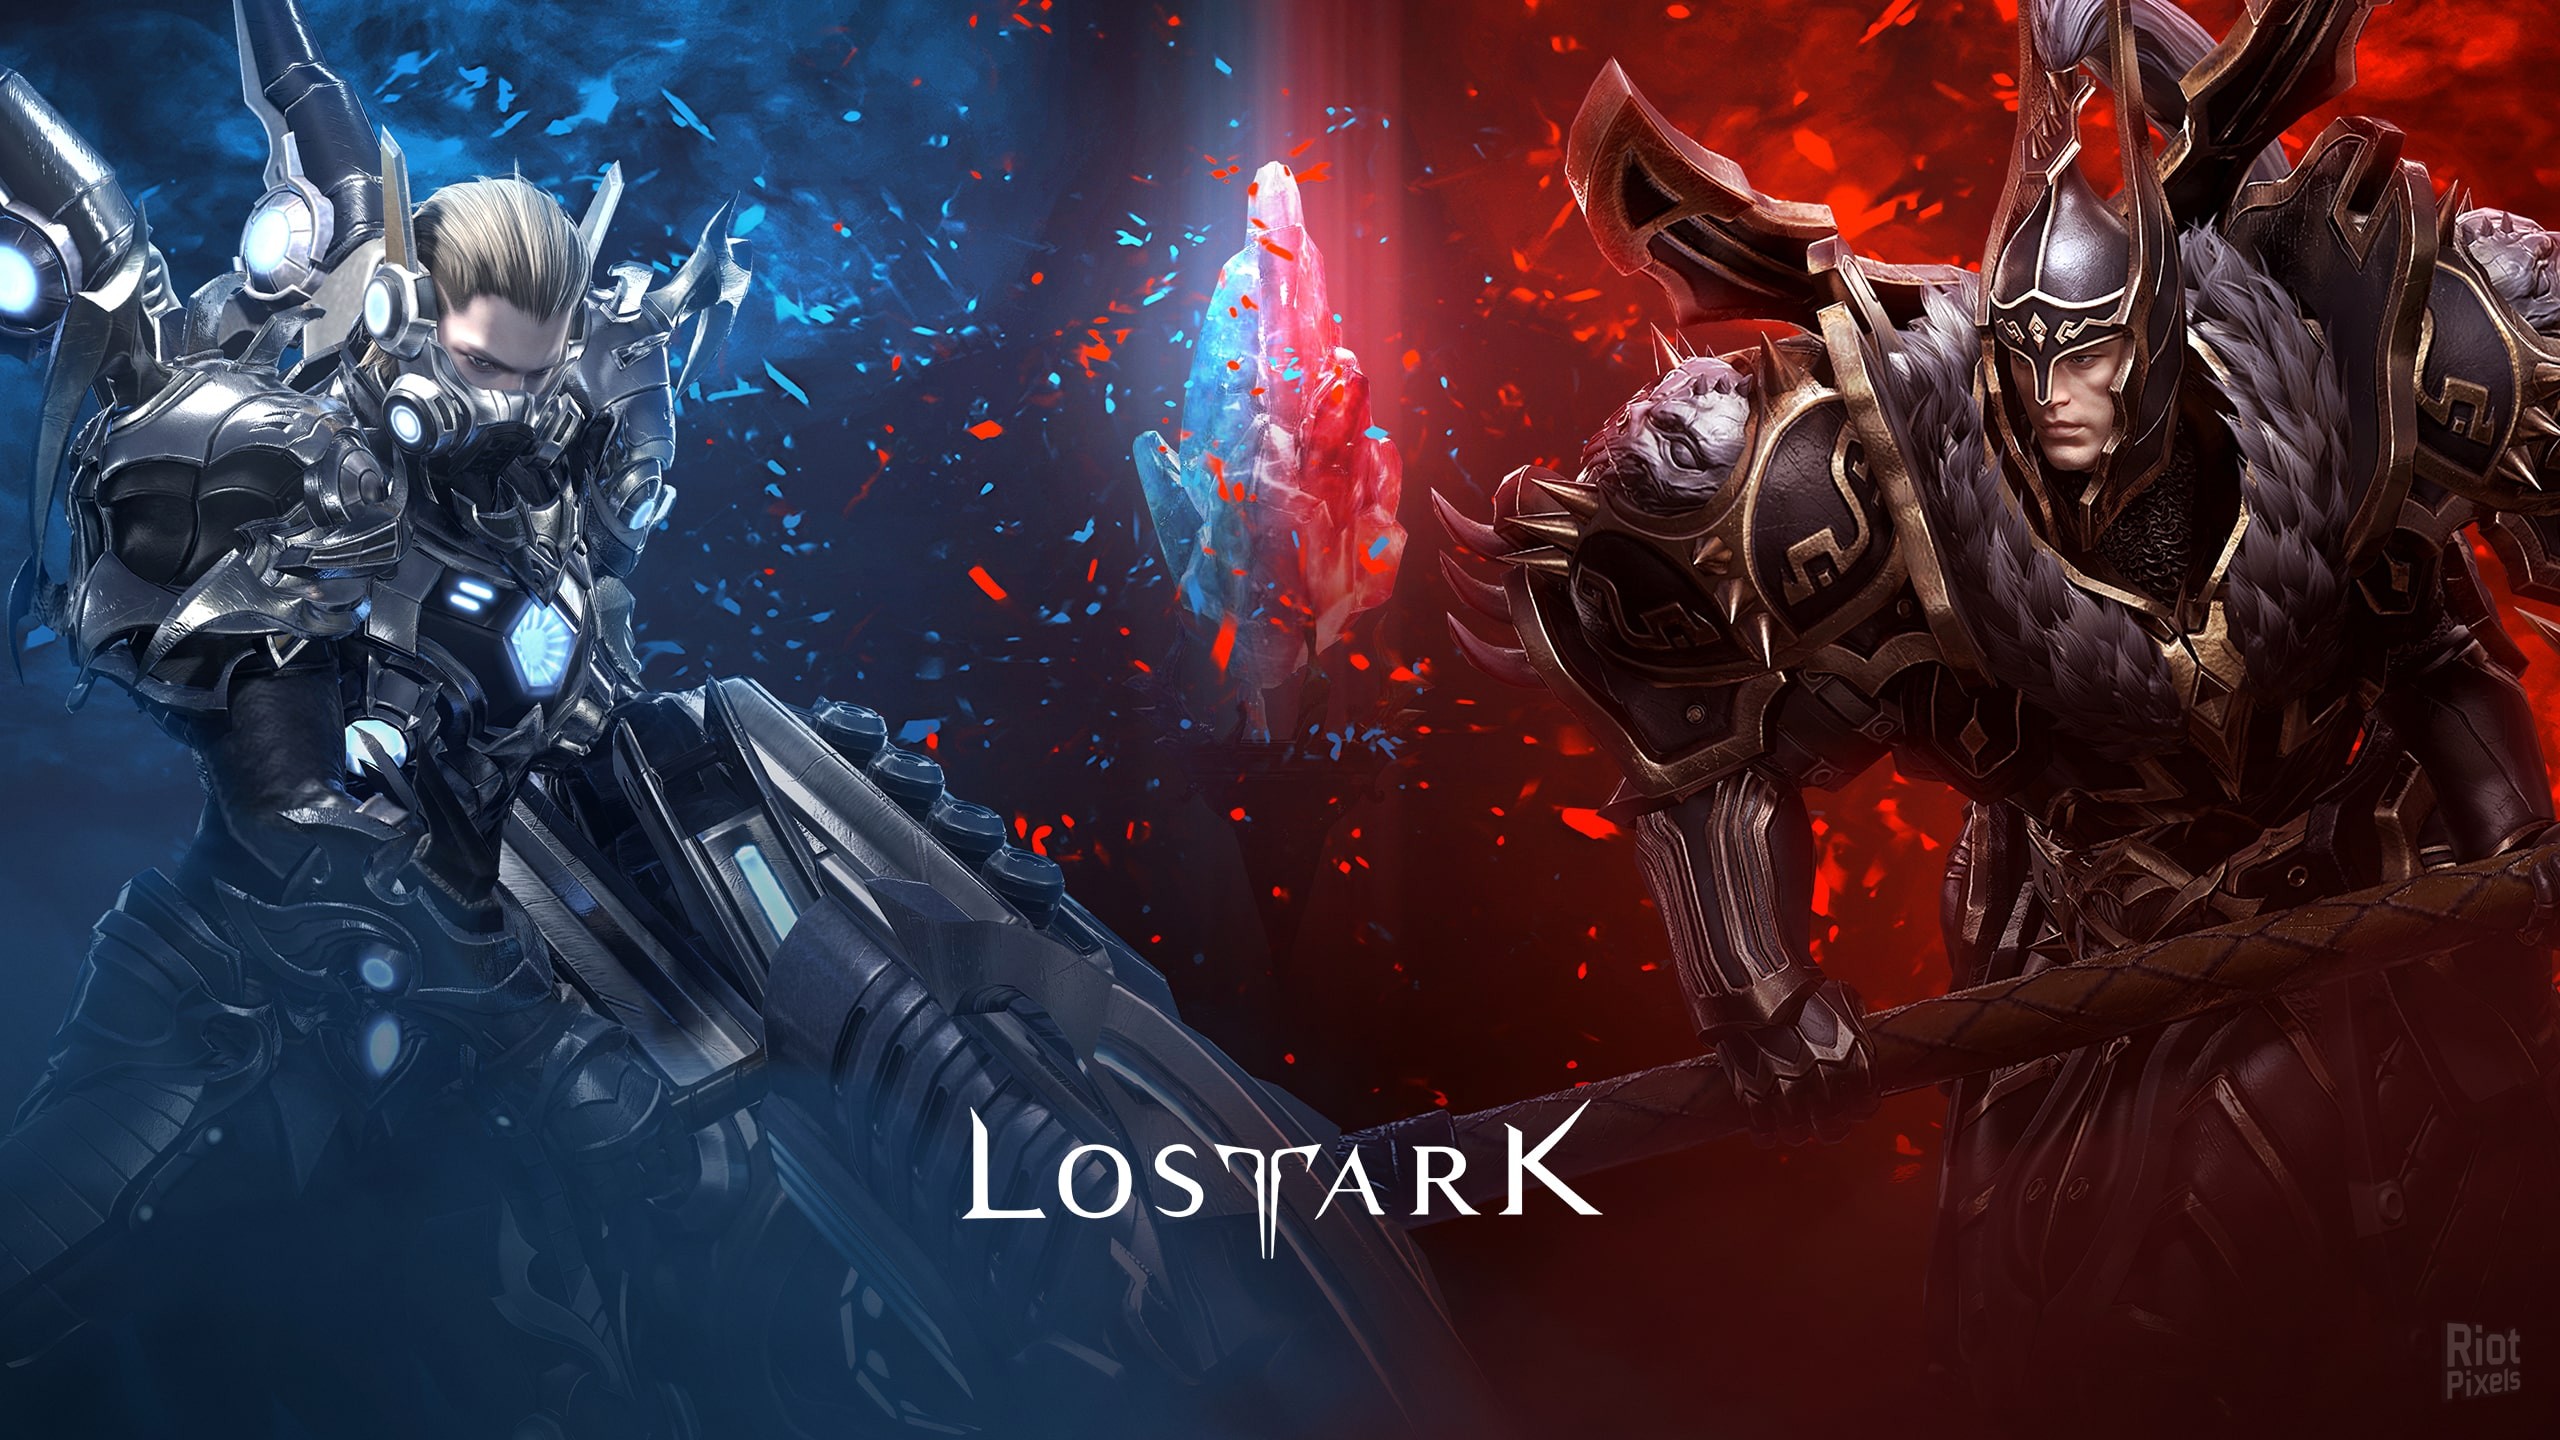 Lost Ark - game wallpapers at Riot Pixels, images